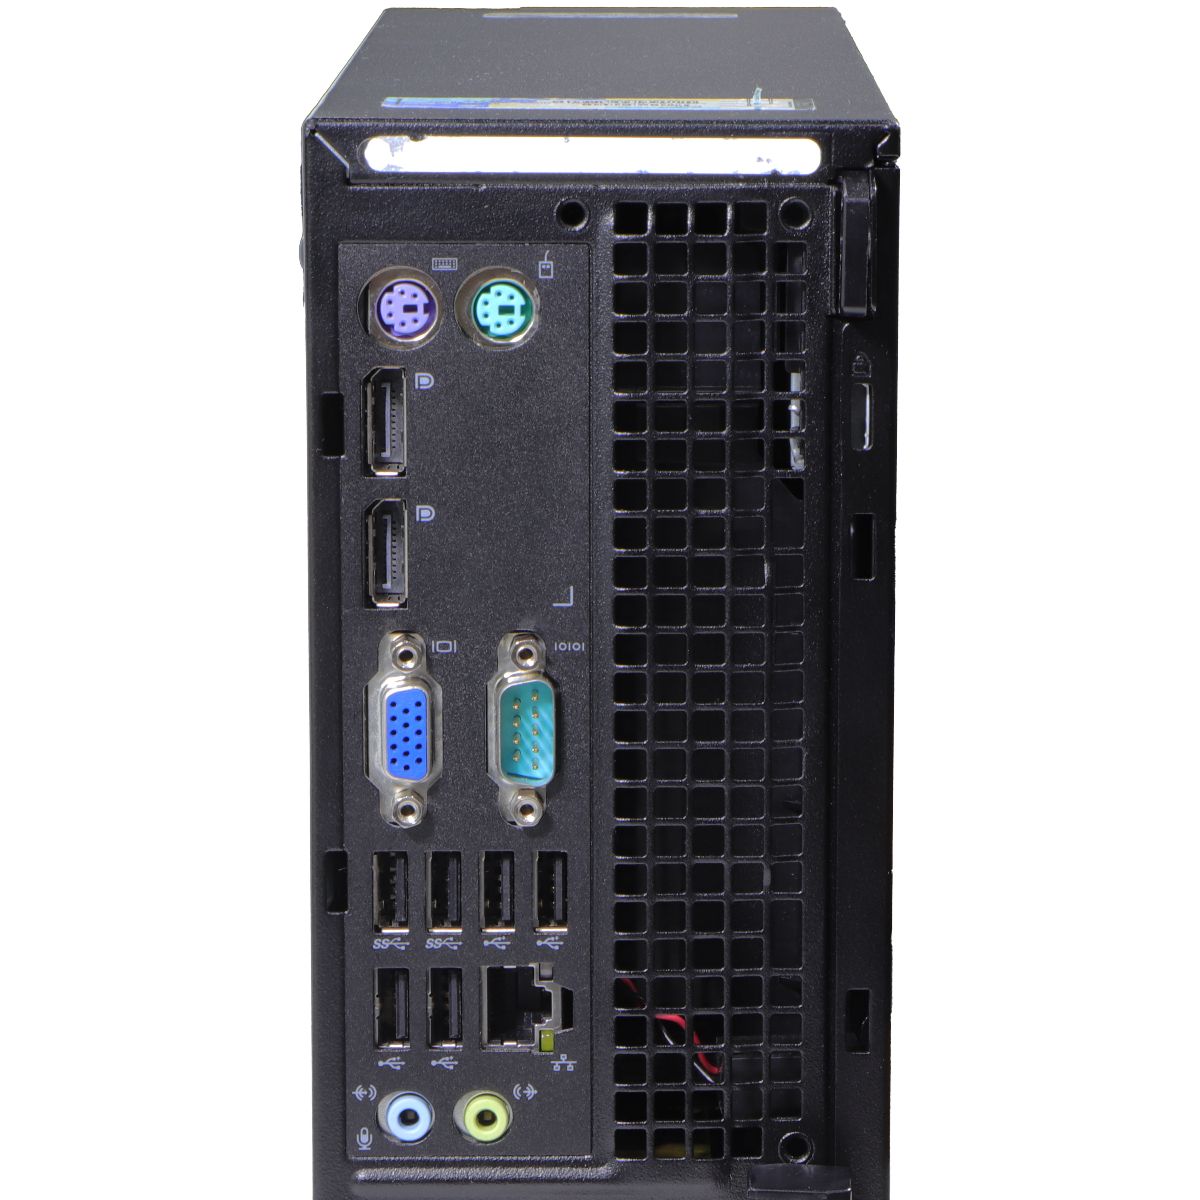 Dell Optiplex 7020 (D07S) SFF Desktop PC Intel i3-4150/500GB HDD/16GB/10 Home PC Desktops & All-In-Ones Dell    - Simple Cell Bulk Wholesale Pricing - USA Seller